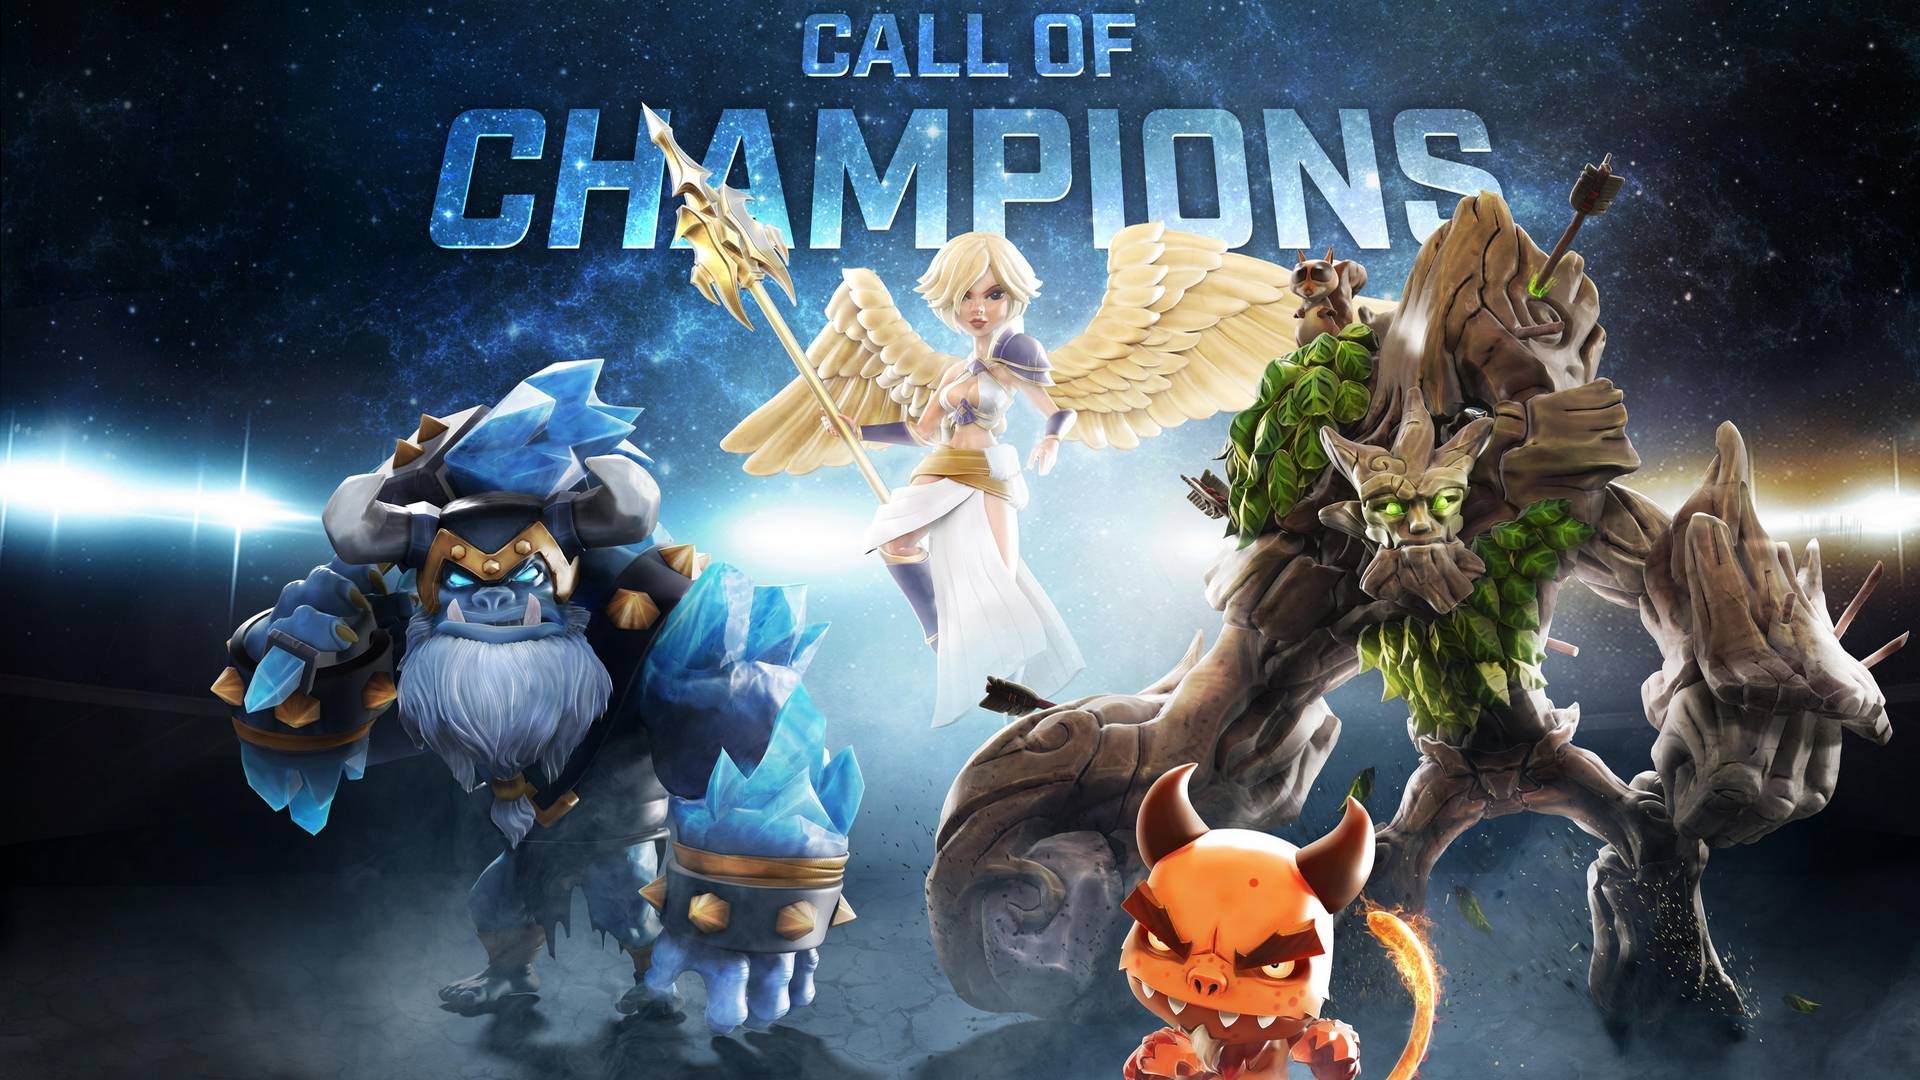 Spacetime Studios’ "Call of Champions" joins the mobile MOBA fray on iOS